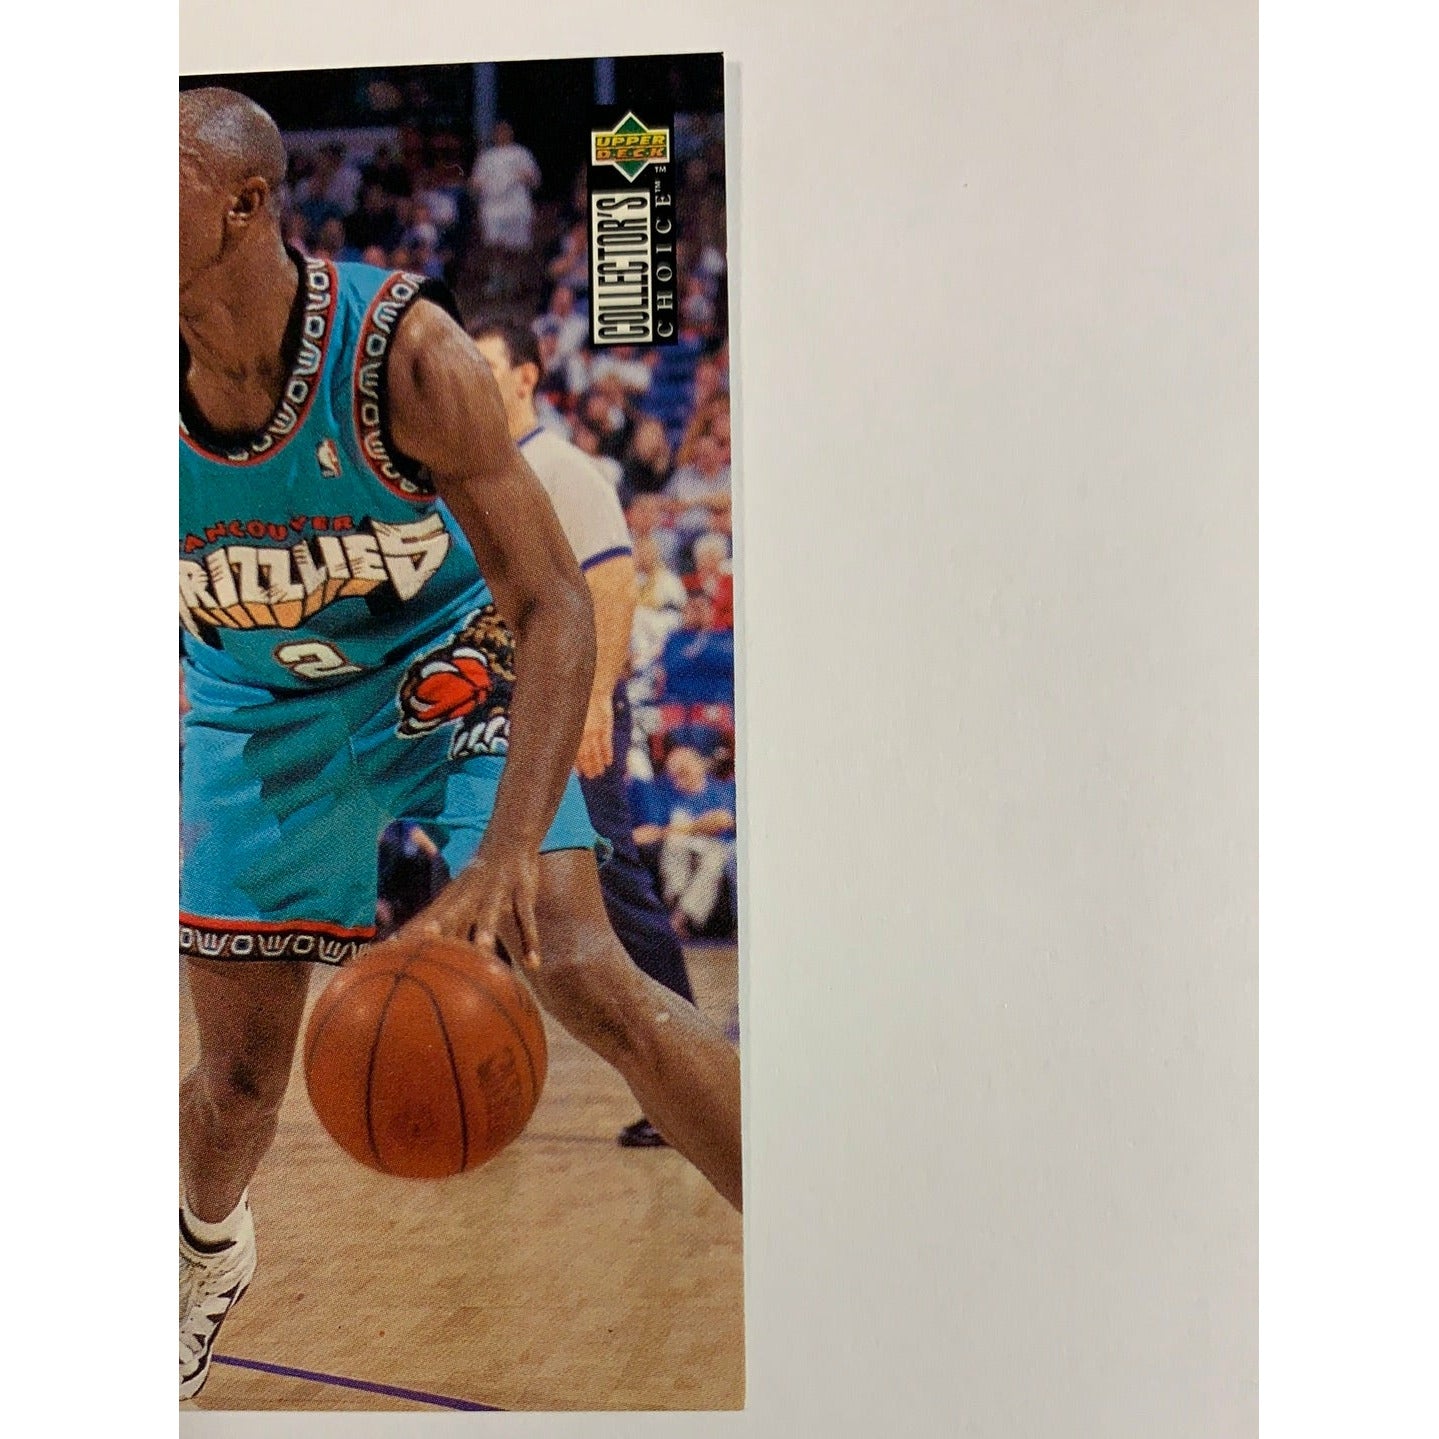 1995-96 Upper Deck Bears Take BC Greg Anthony-Local Legends Cards & Collectibles